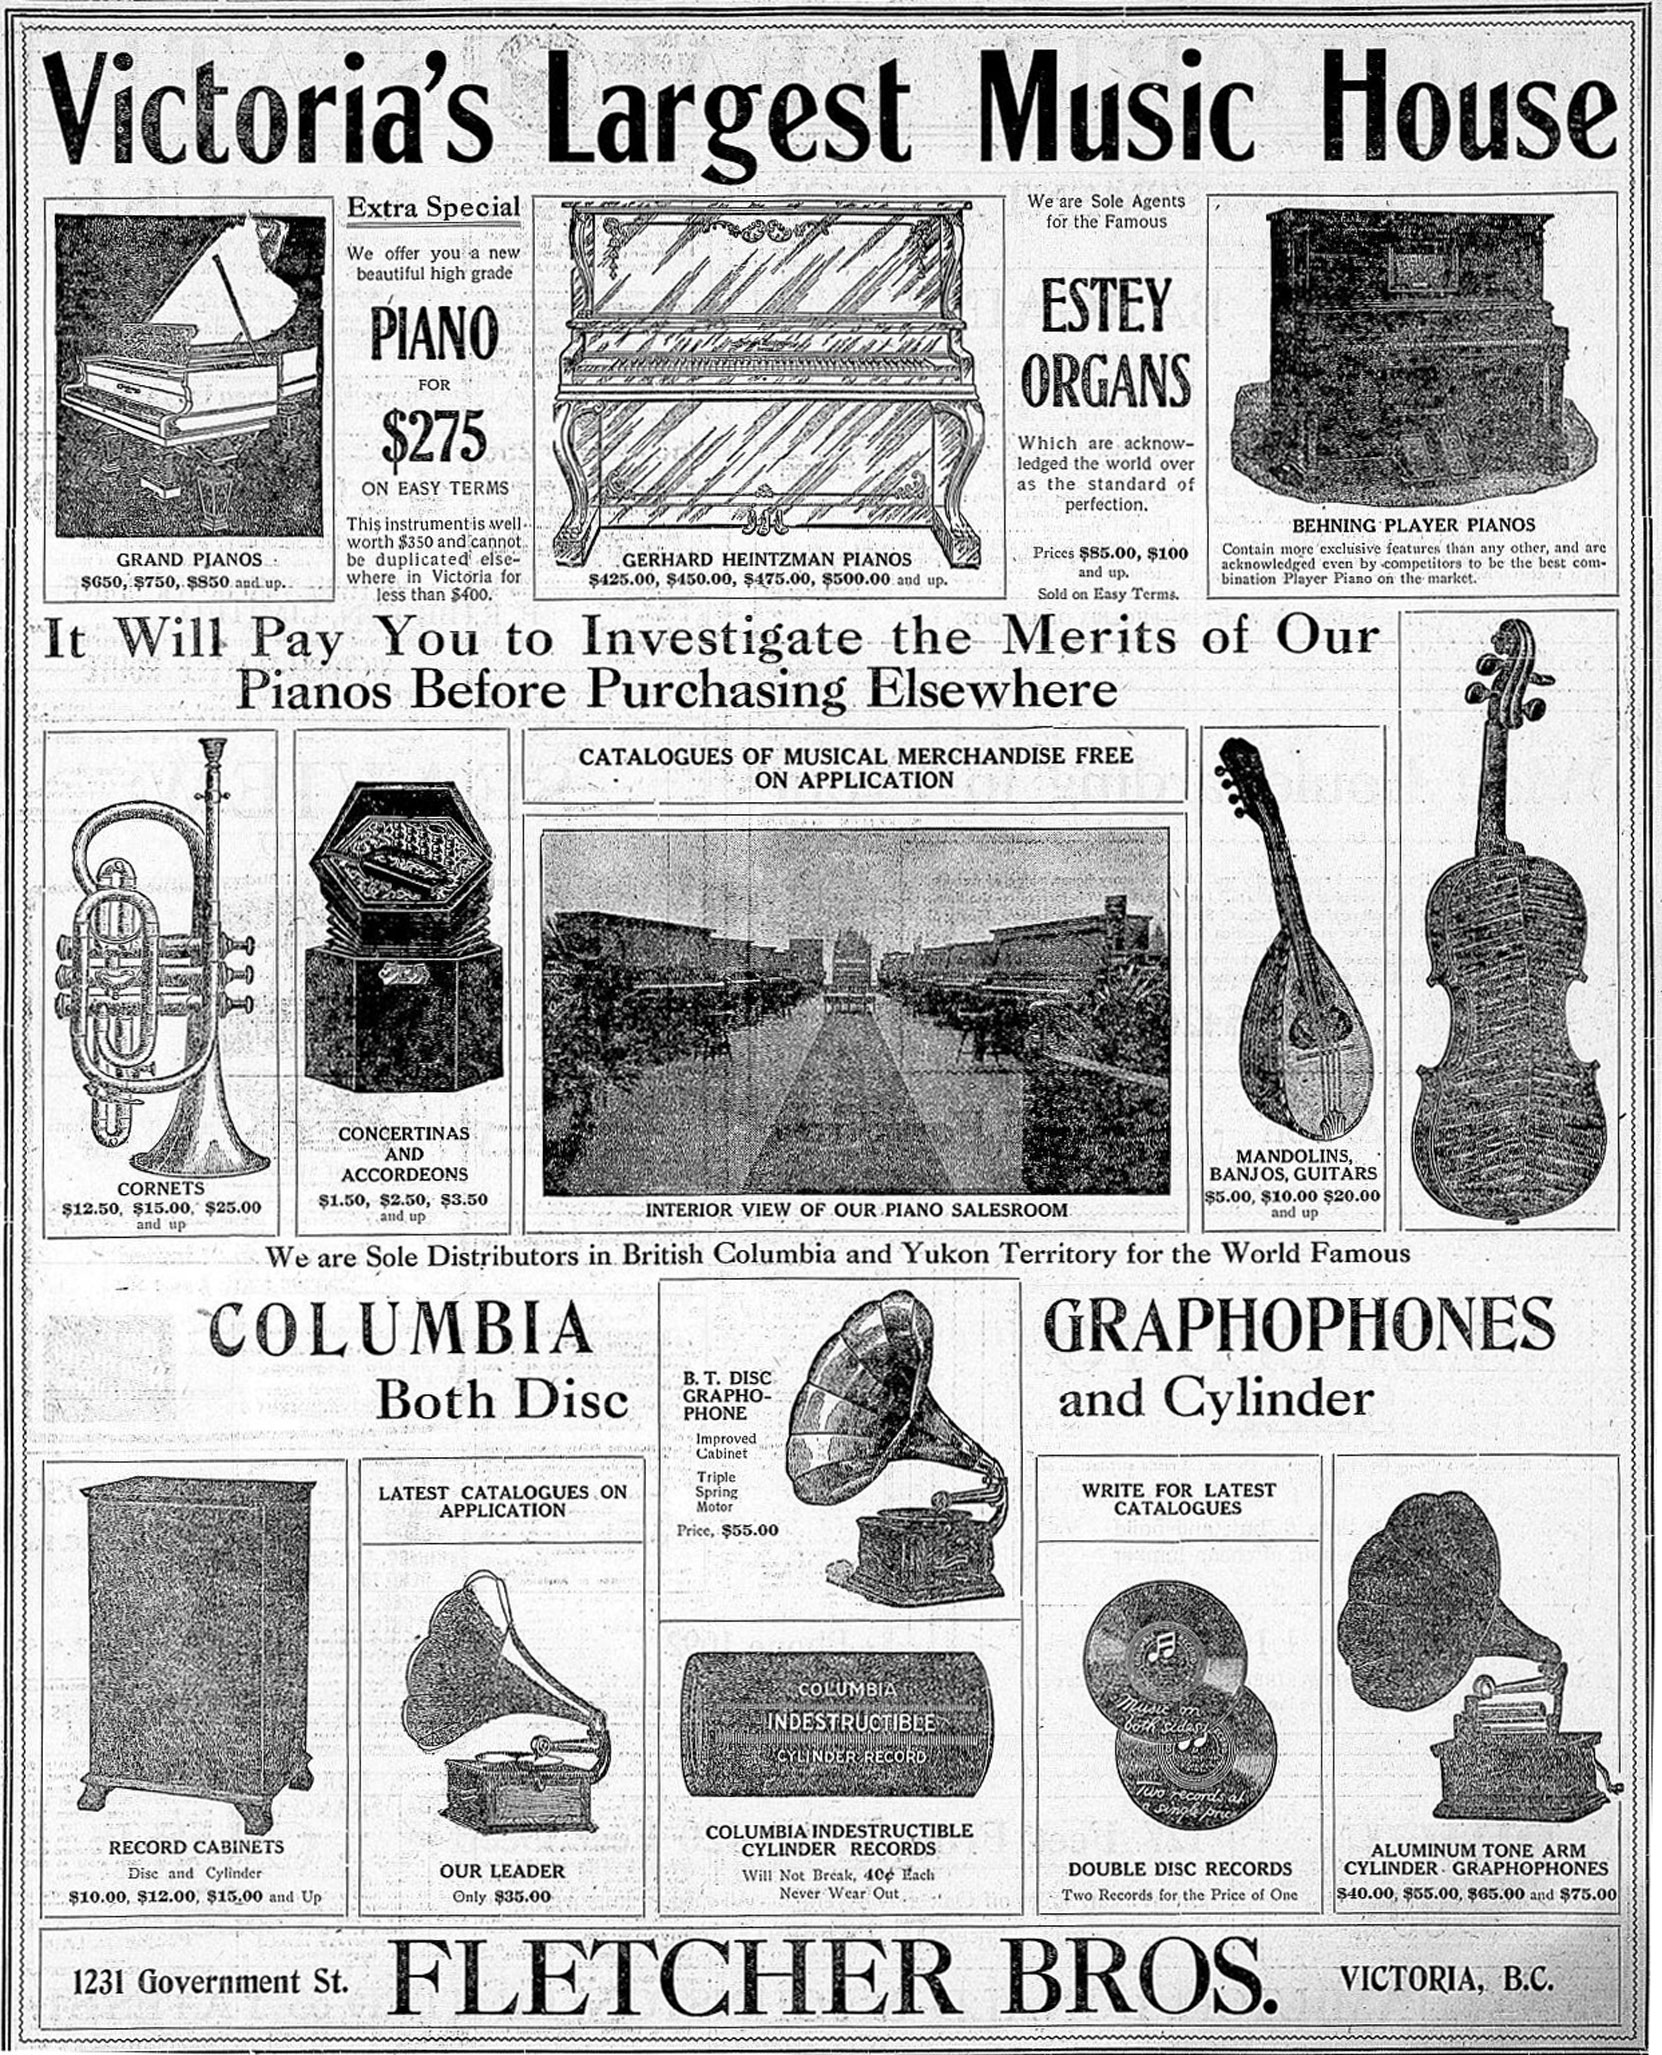 1908 newspaper advertisement for Fletcher Brothers, 1231 Government Street, showing the interior of the store and illustrations of the record and phonograph technology of the period. (Victoria Online Sightseeing Tours collection)